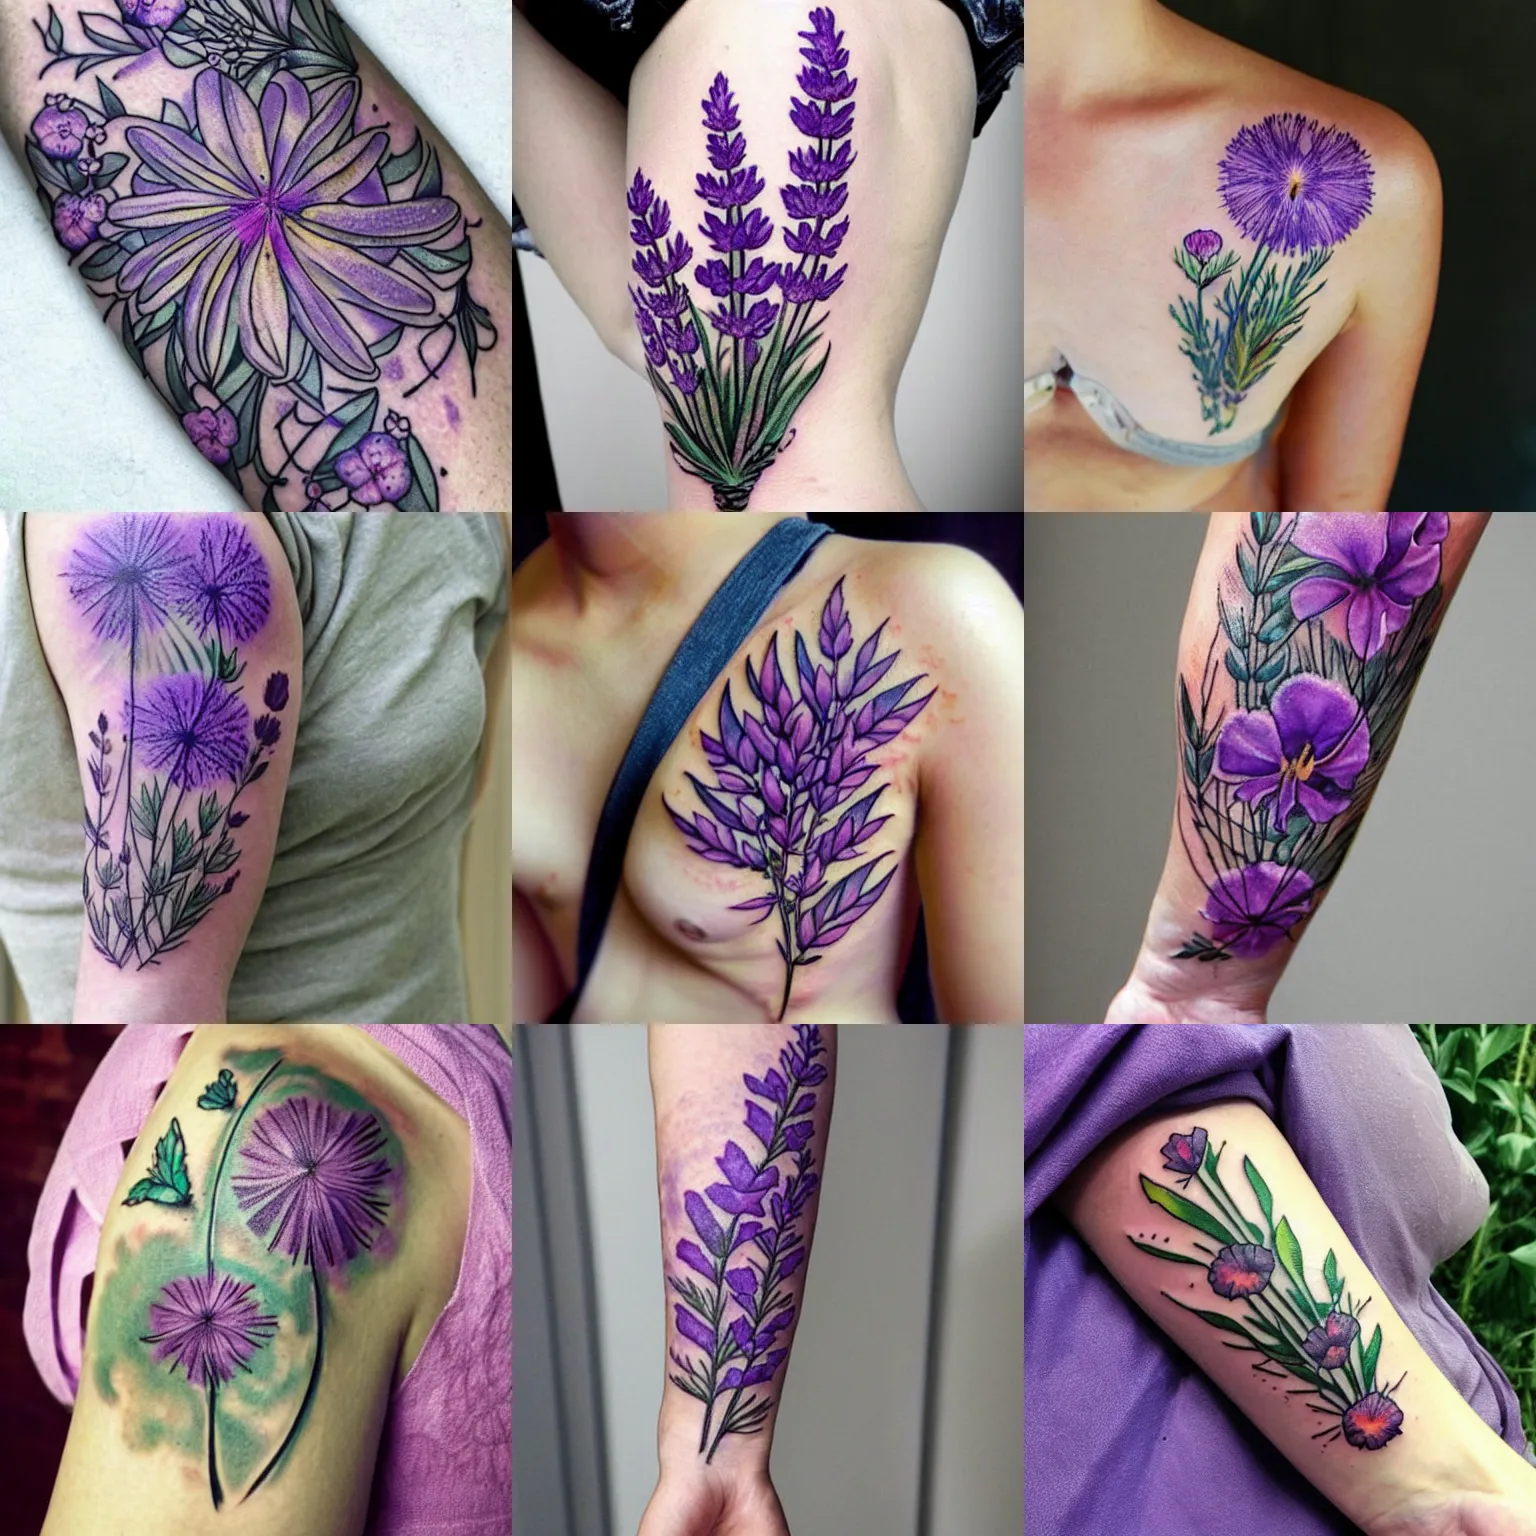 Tattoo tagged with: flower, small, black, tiny, lavender, little, nature,  forearm, poonkaros, medium size, illustrative | inked-app.com